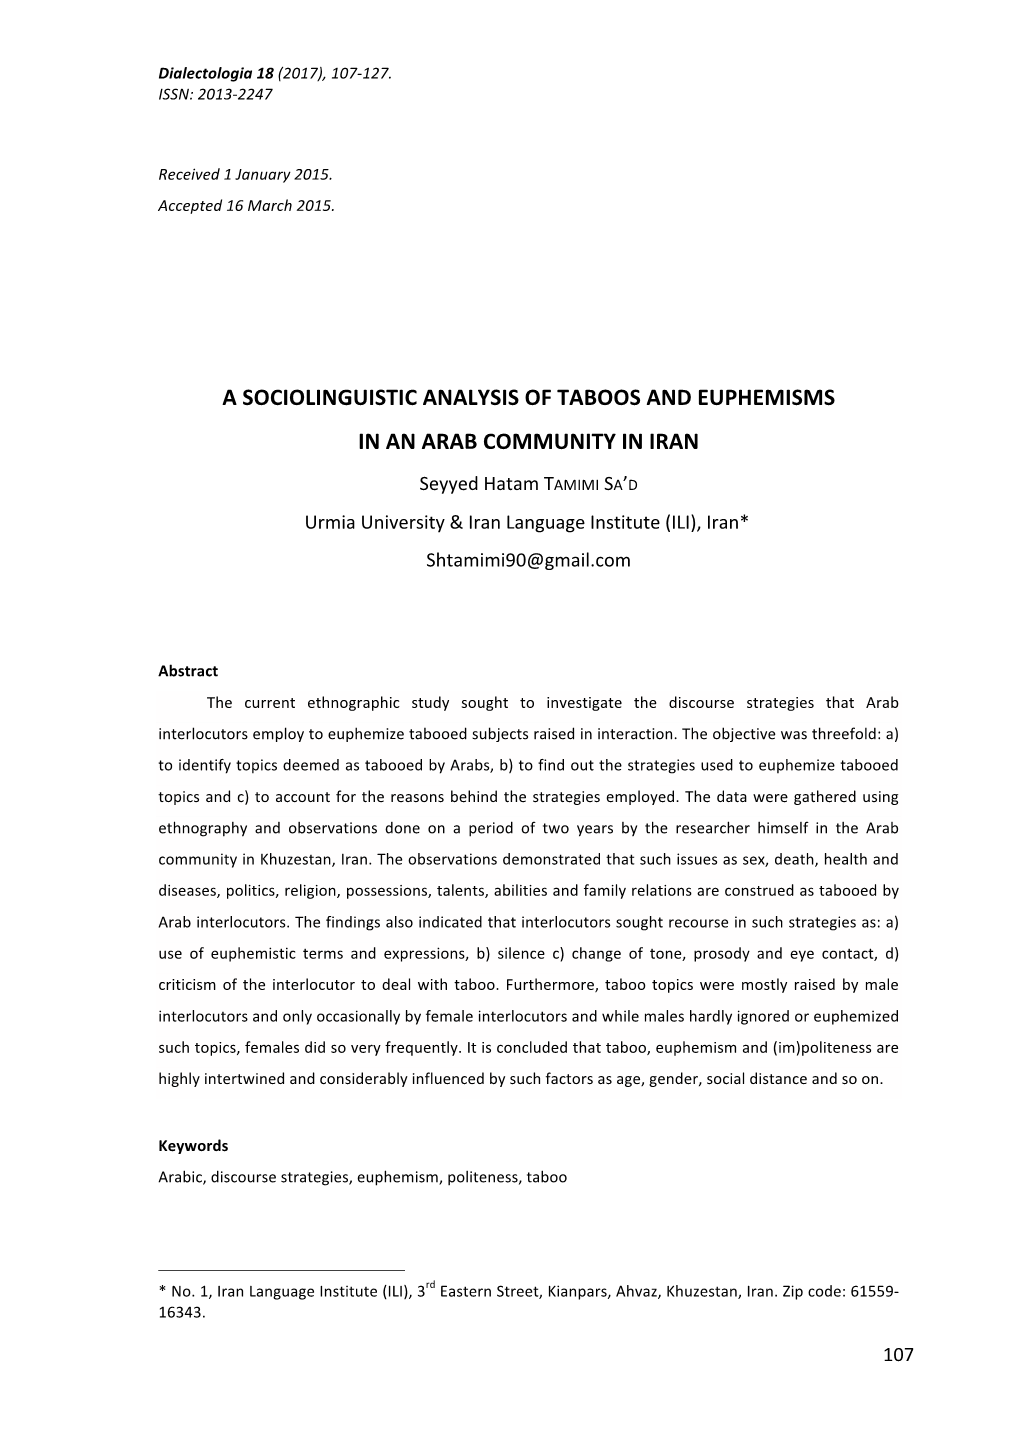 A Sociolinguistic Analysis of Taboos and Euphemisms in an Arab Community in Iran